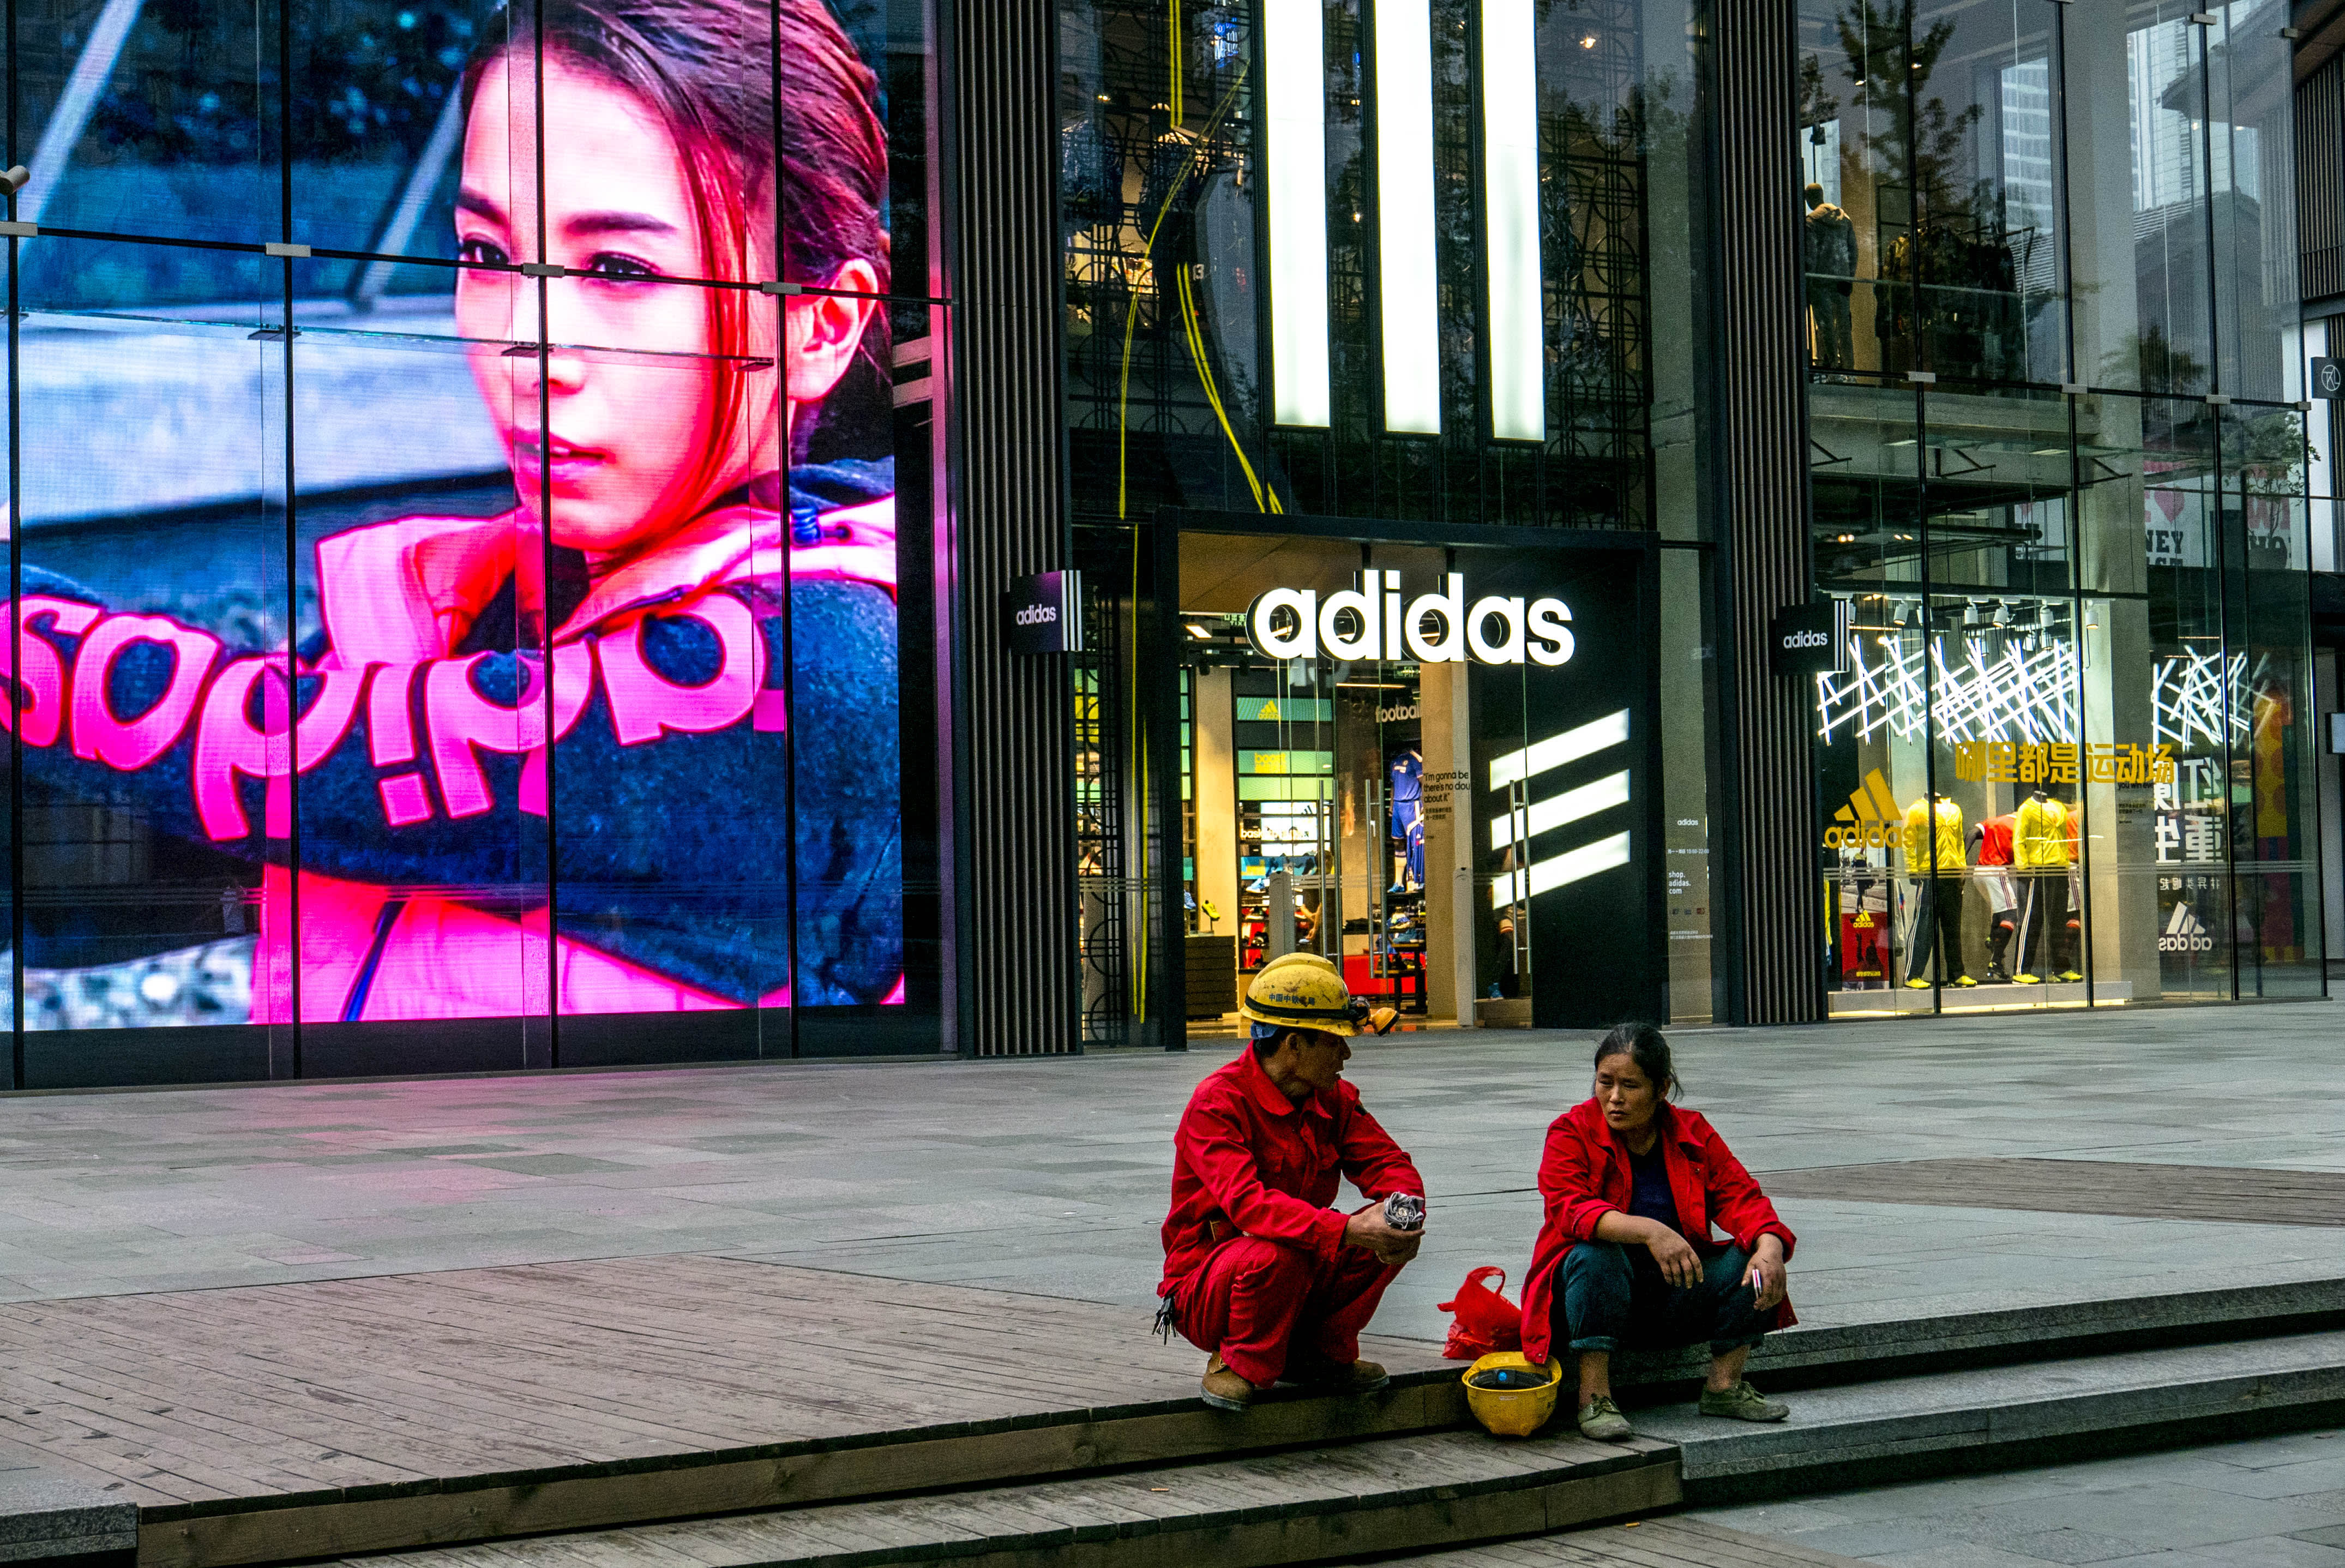 Ik zie je morgen gewicht meel 10% of Adidas products in Asia are fakes, CEO says